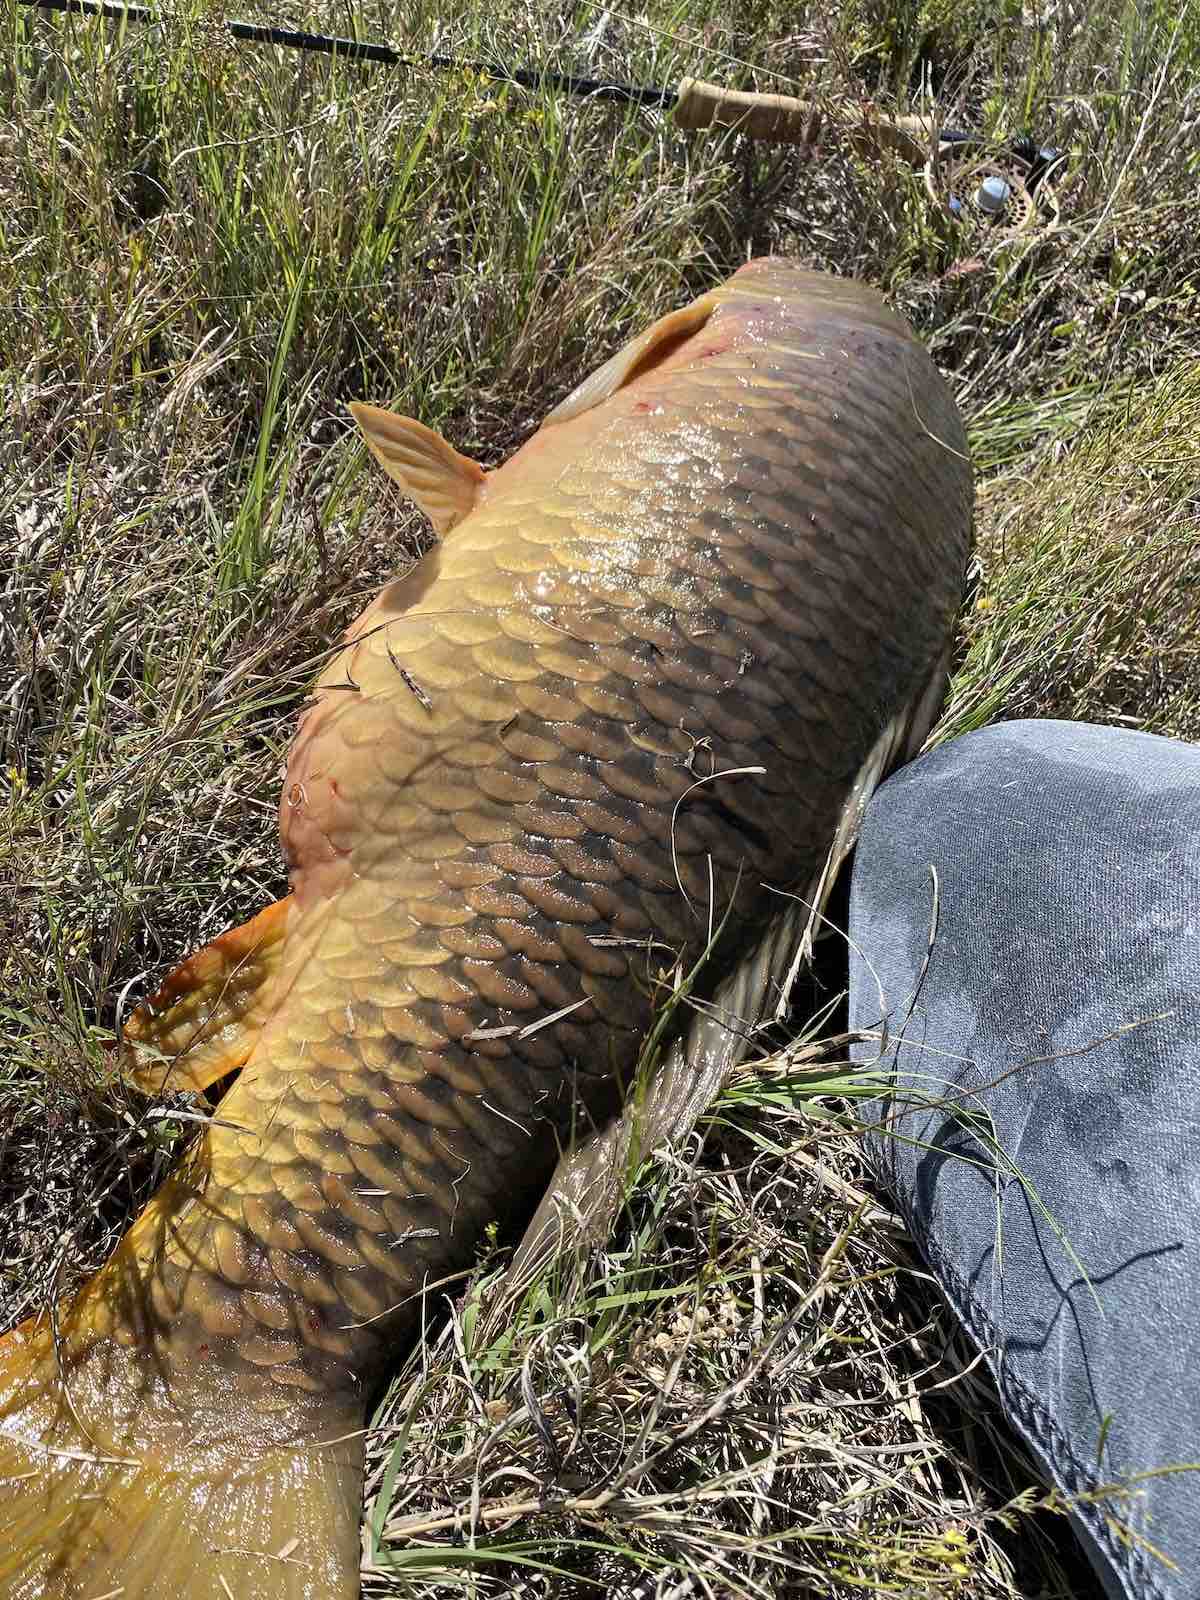 Giant river carp caught on a fly